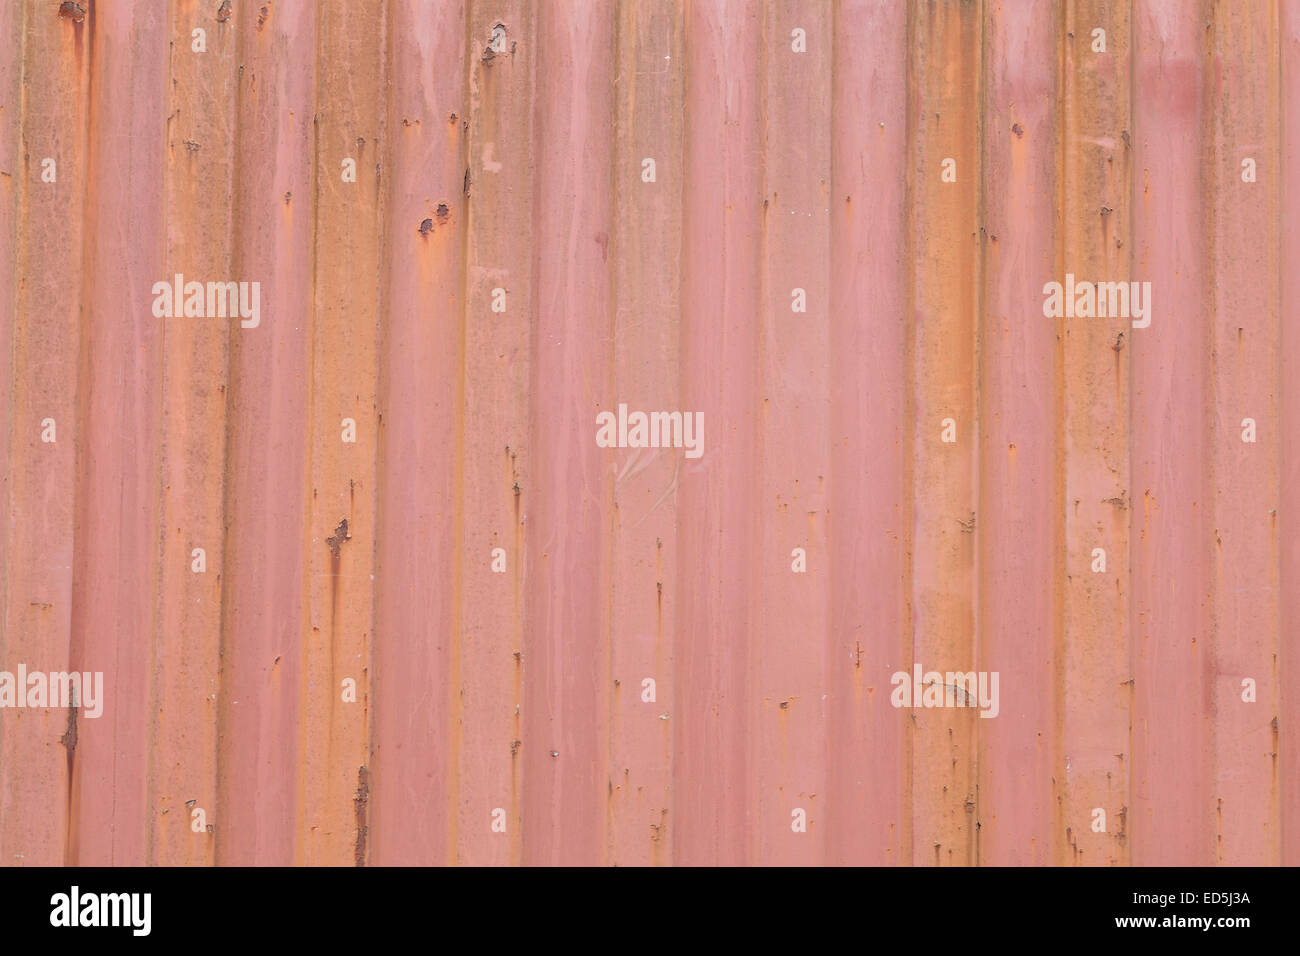 corrugated metal rusty texture background Stock Photo